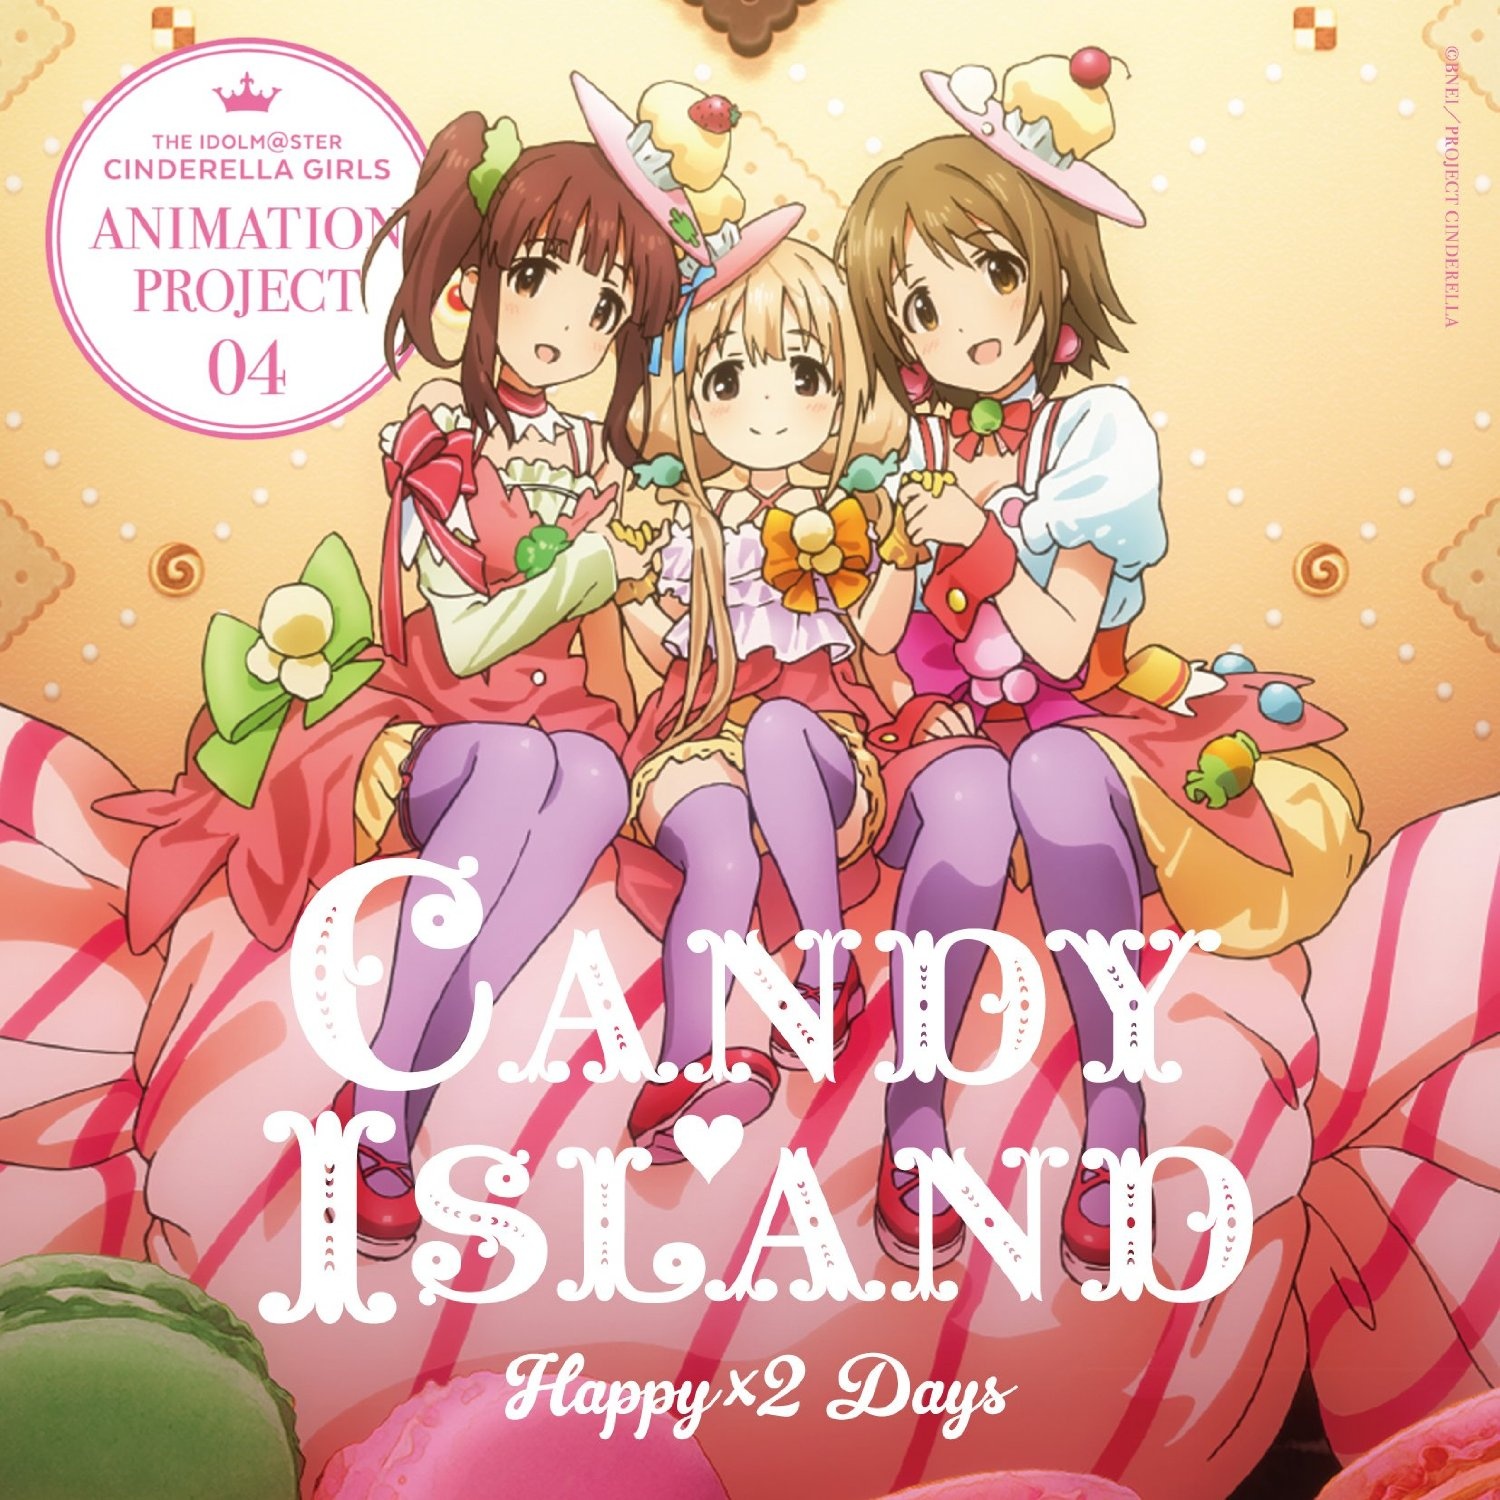 THE IDOLM STER CINDERELLA GIRLS ANIMATION PROJECT 04 Happy 2 Days